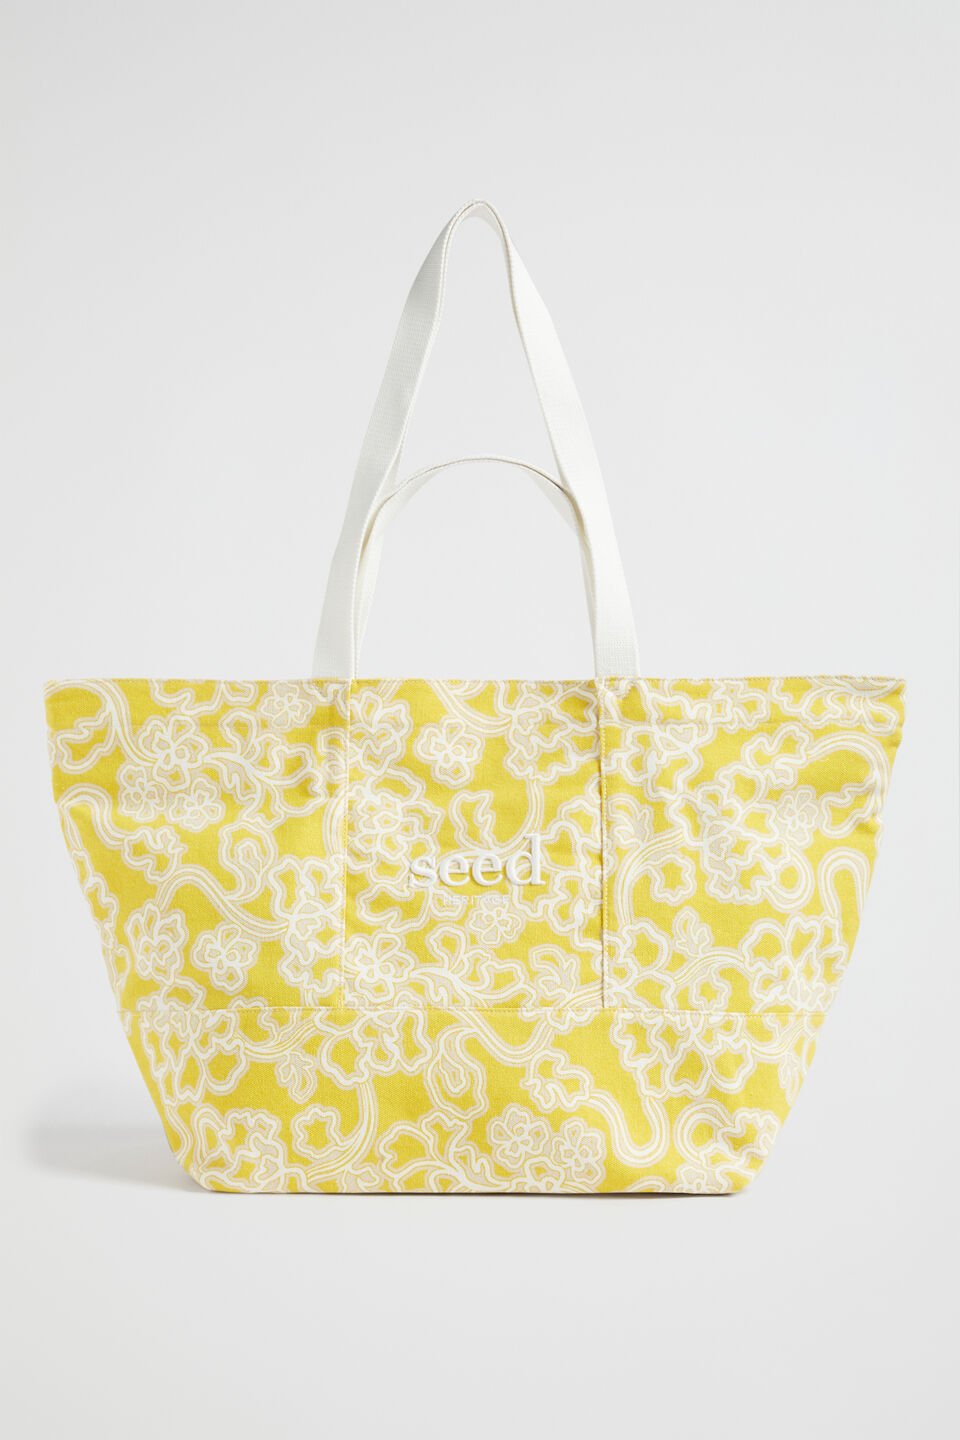 Seed Overnight Bag  Gold Amber Floral